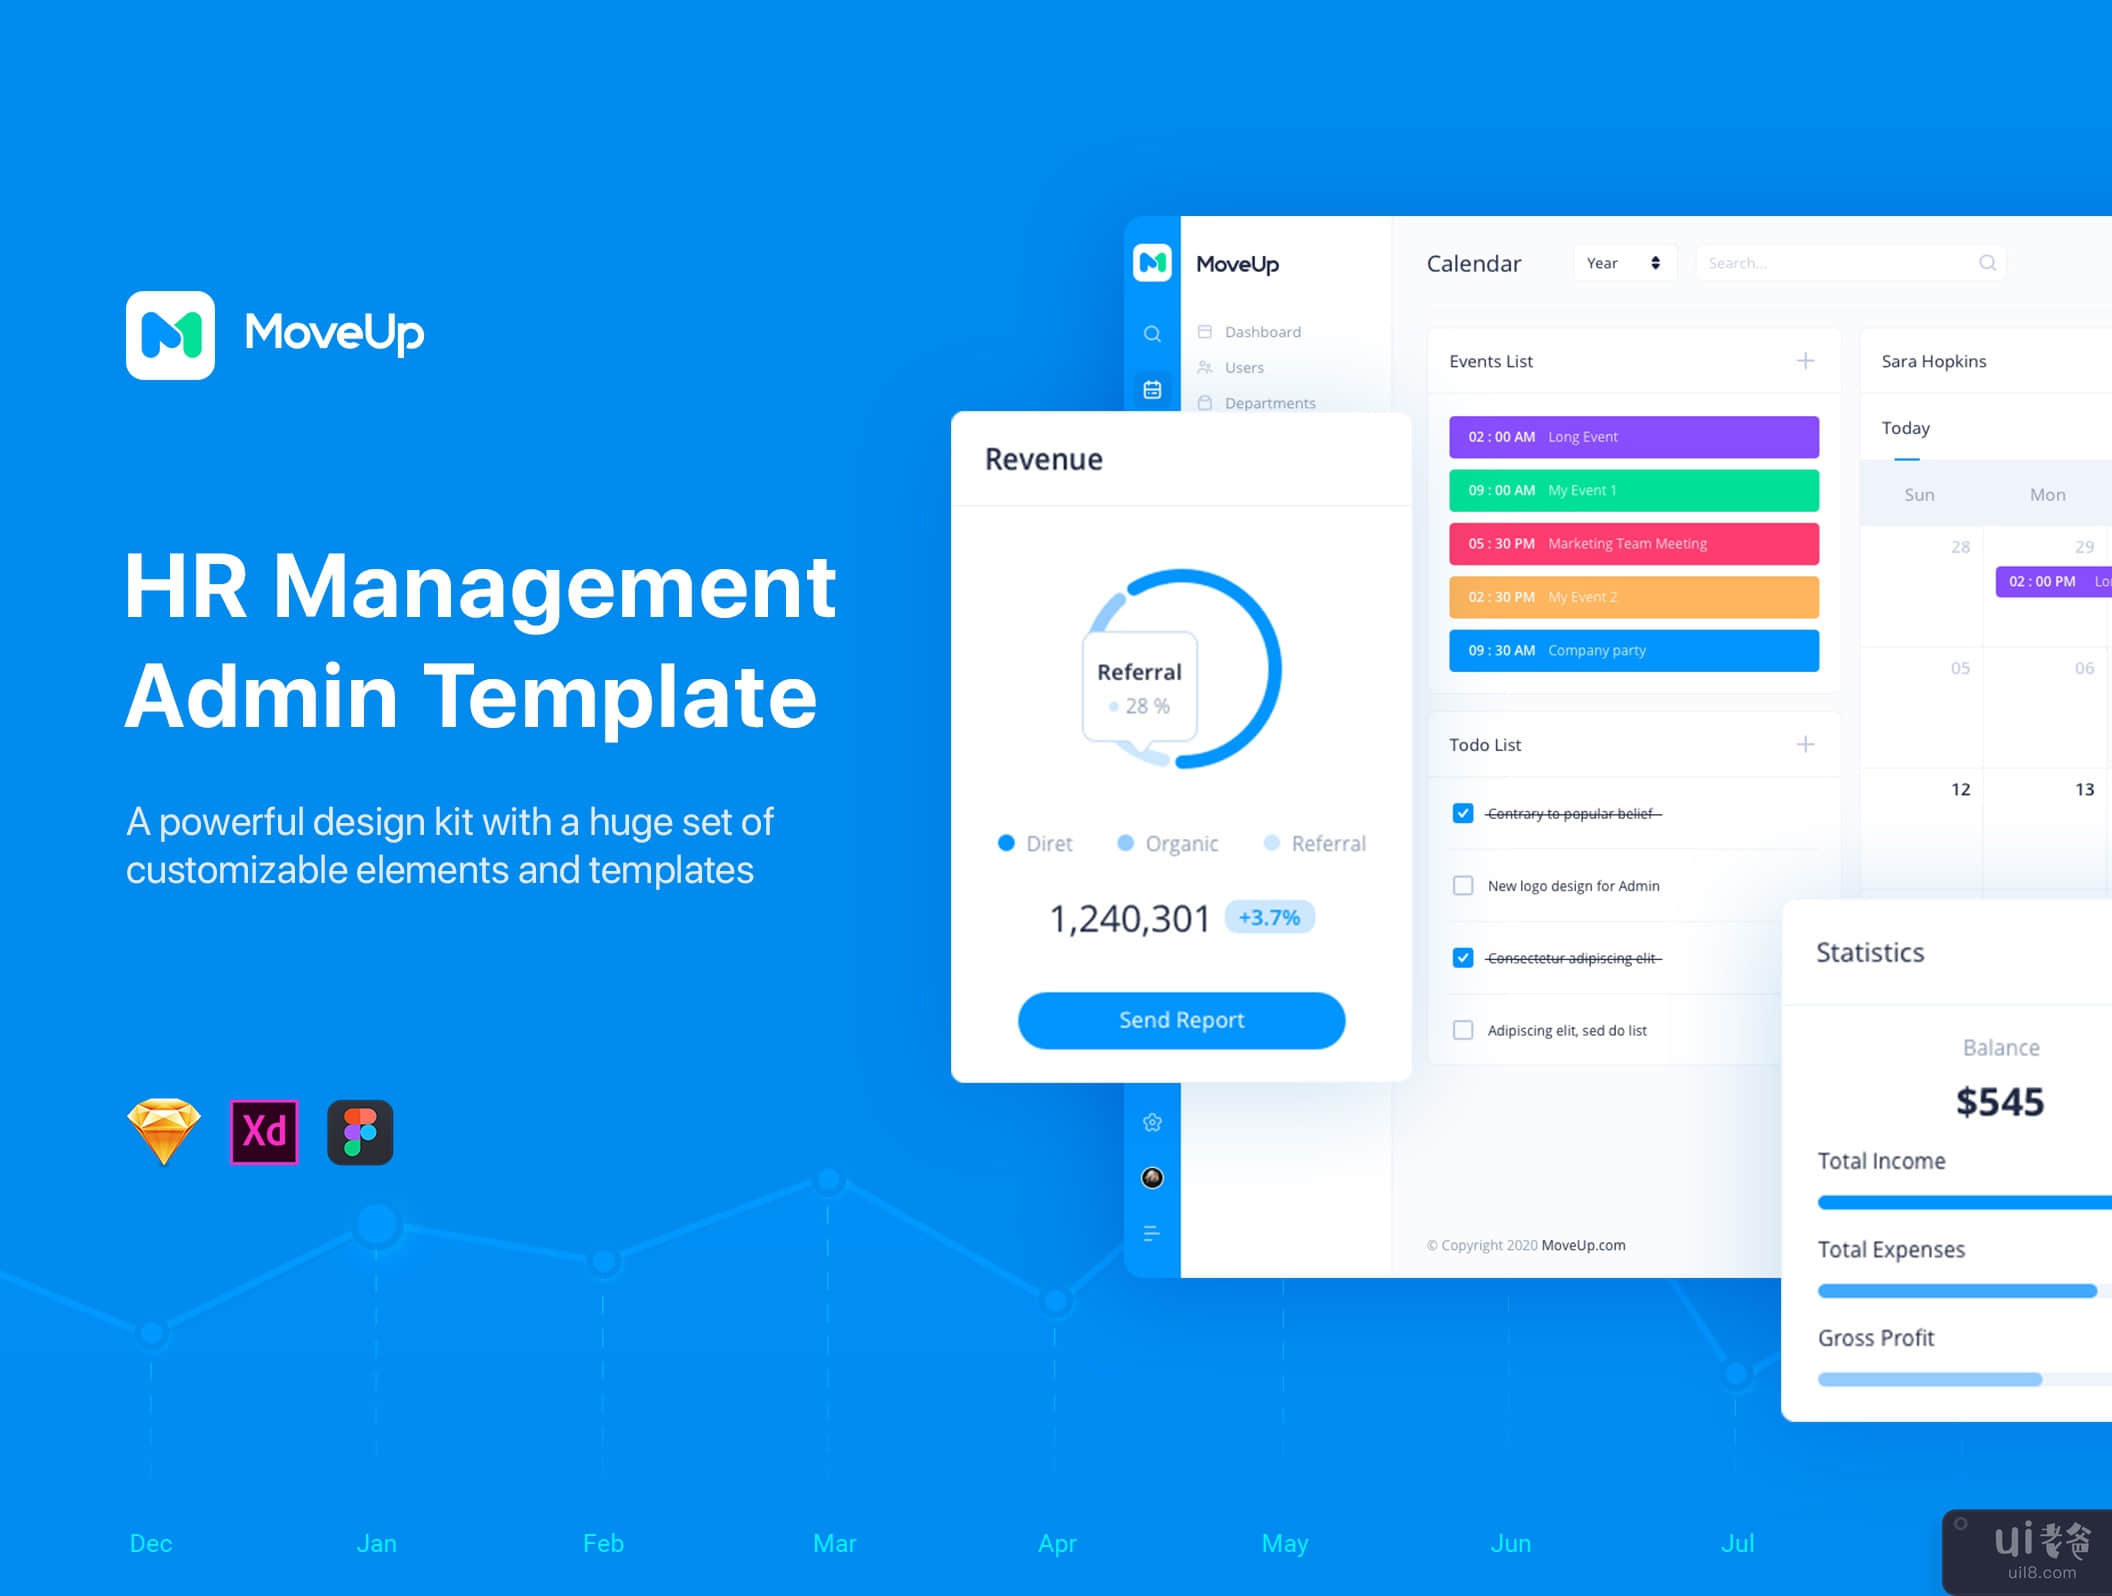 MoveUp - Sketch 的人力资源管理管理模板(MoveUp - HR Management Admin Template for Sketch)插图1